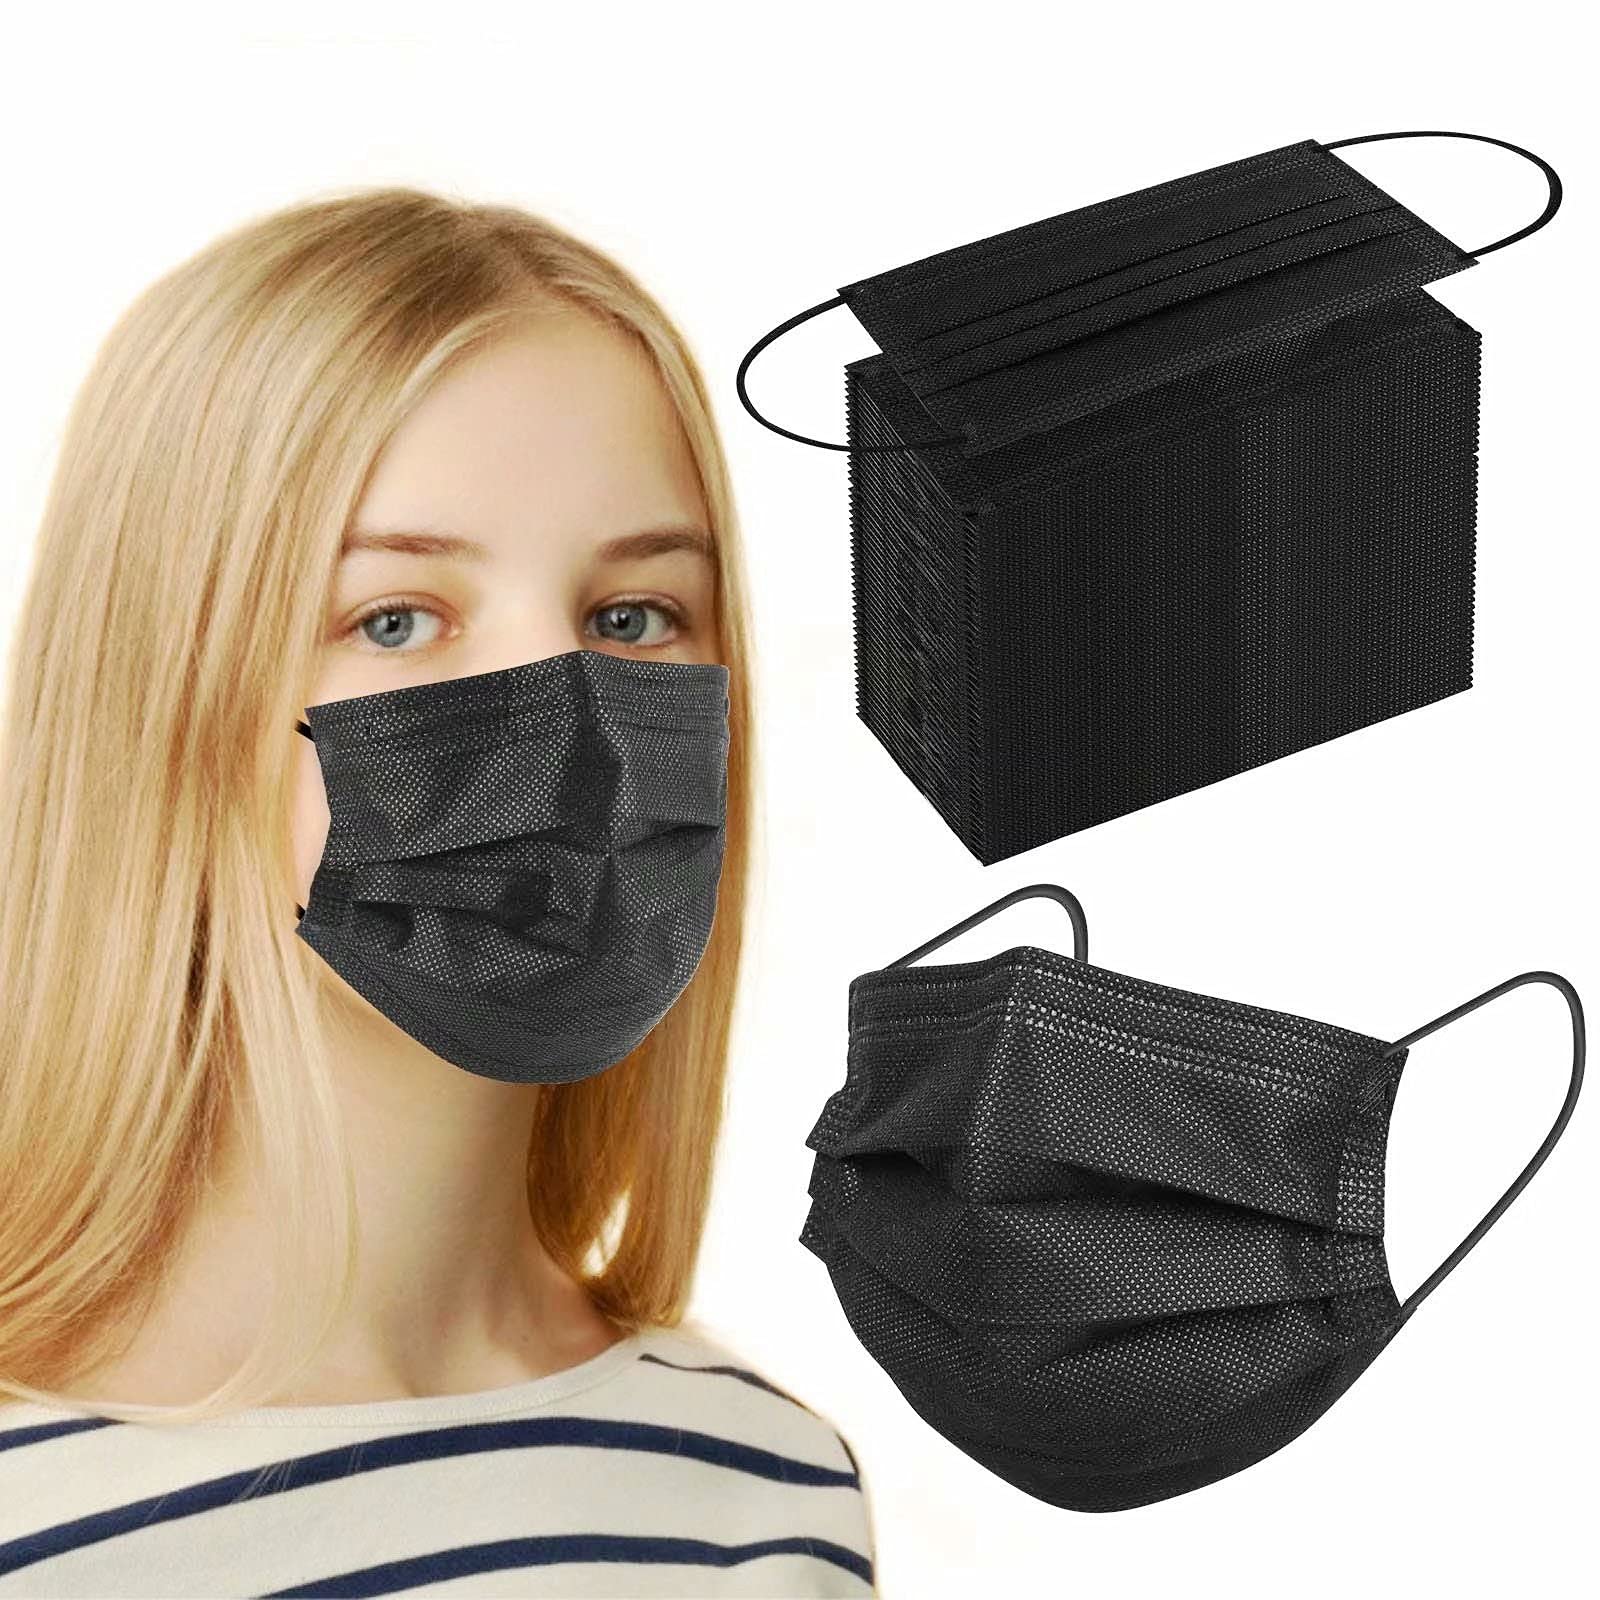 100Pcs Black Disposable Face Mask, 3 Ply Black Face Masks with Soft Elastic Ear Loops $5.52